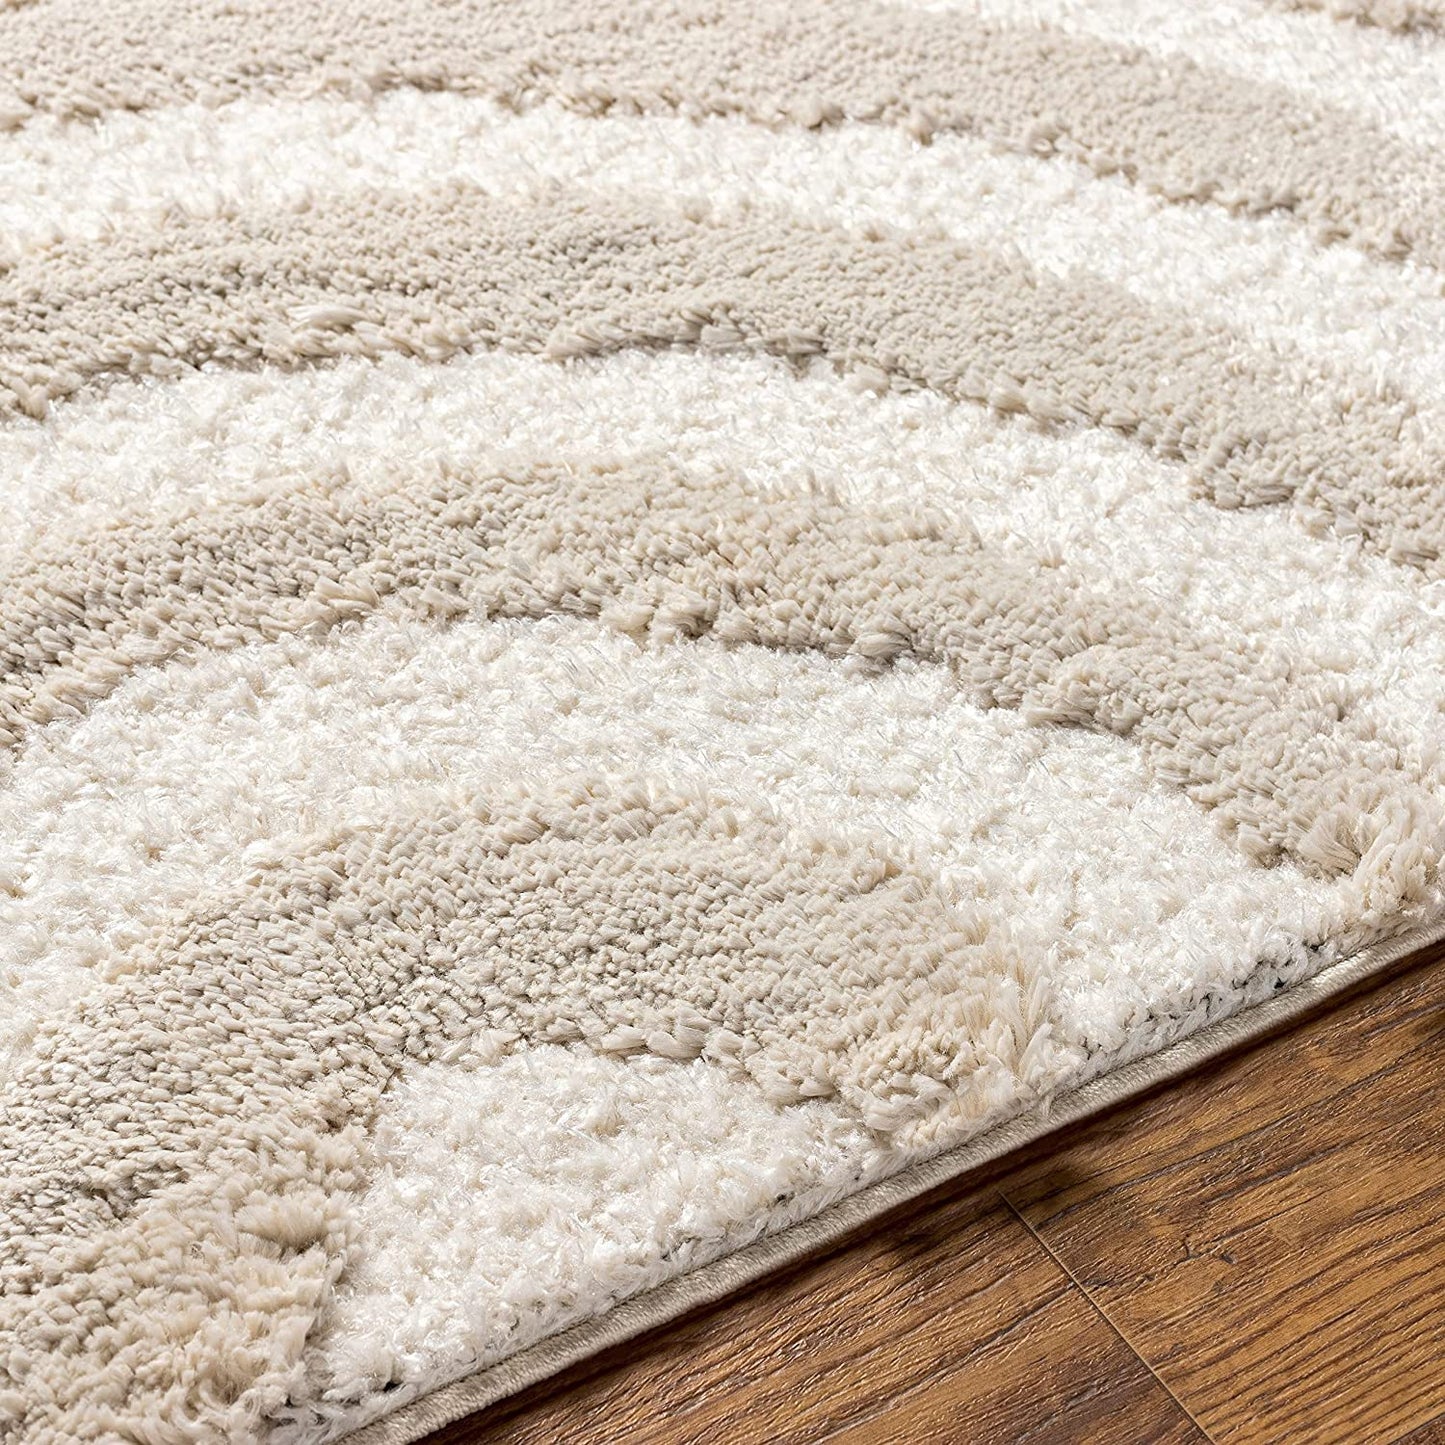 Kashyapa Rugs Collection - Beige with Ivory Extra Soft Luxury Area Rug Fluffy Carpet Living Room, Bed Room childroom Shag Carpet and Hall